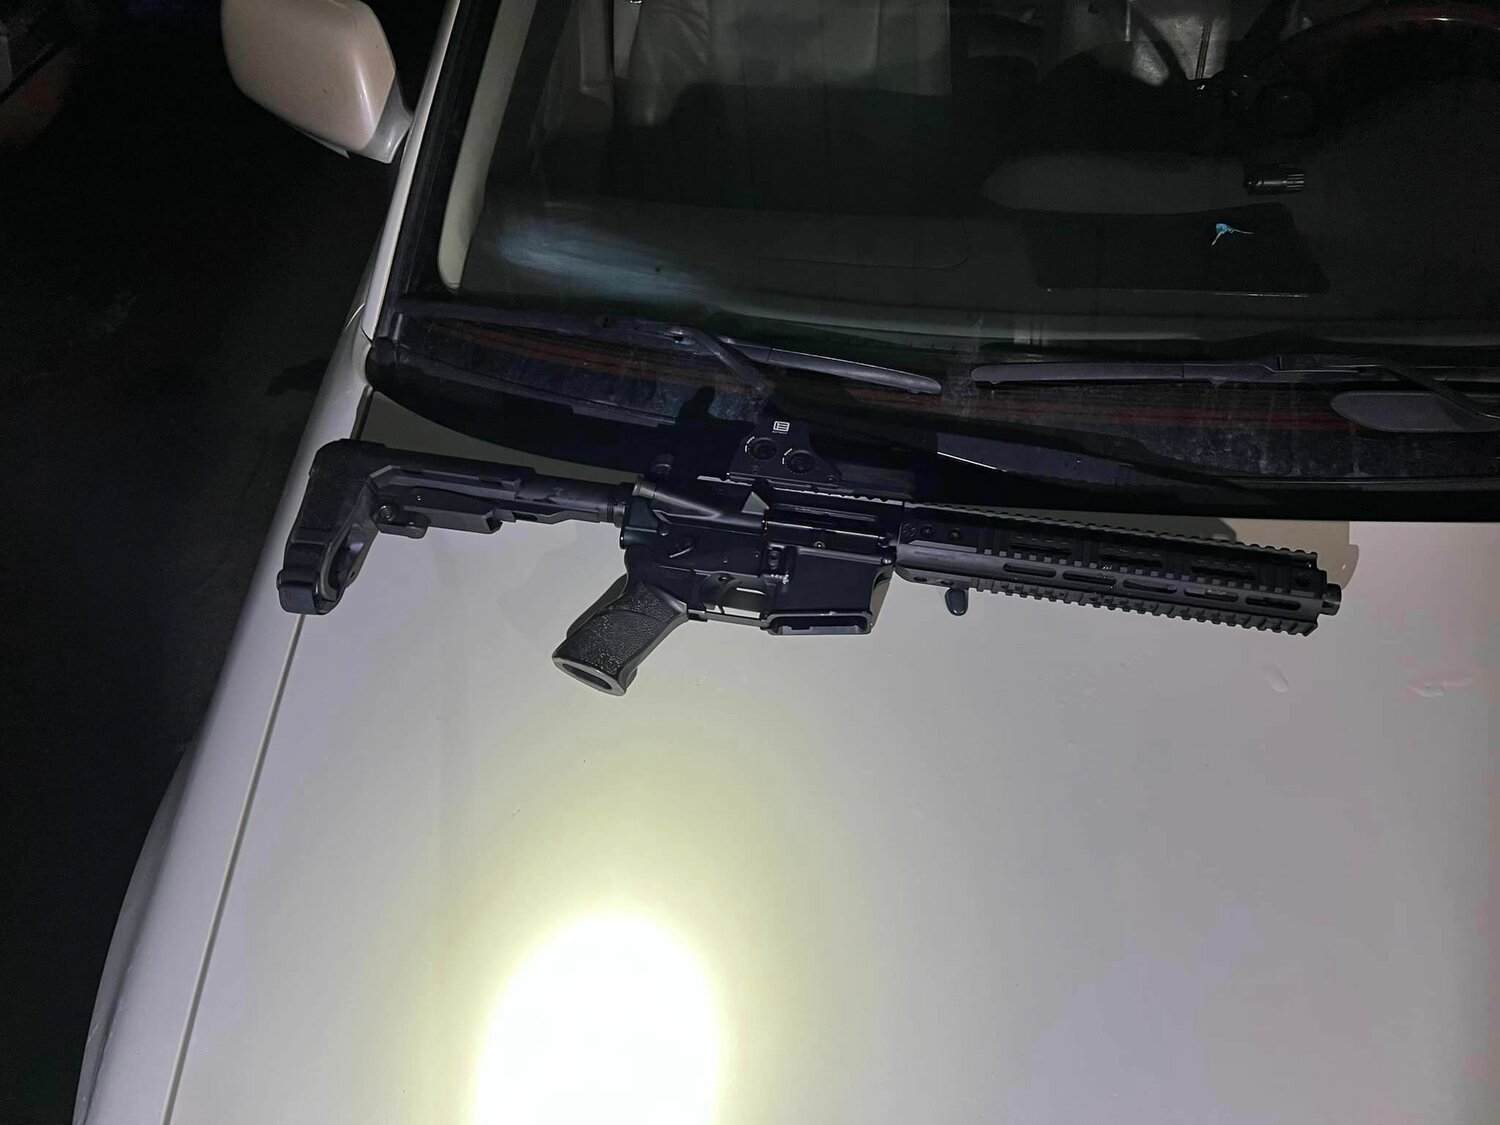 AR15 rifle taken from the suspect.